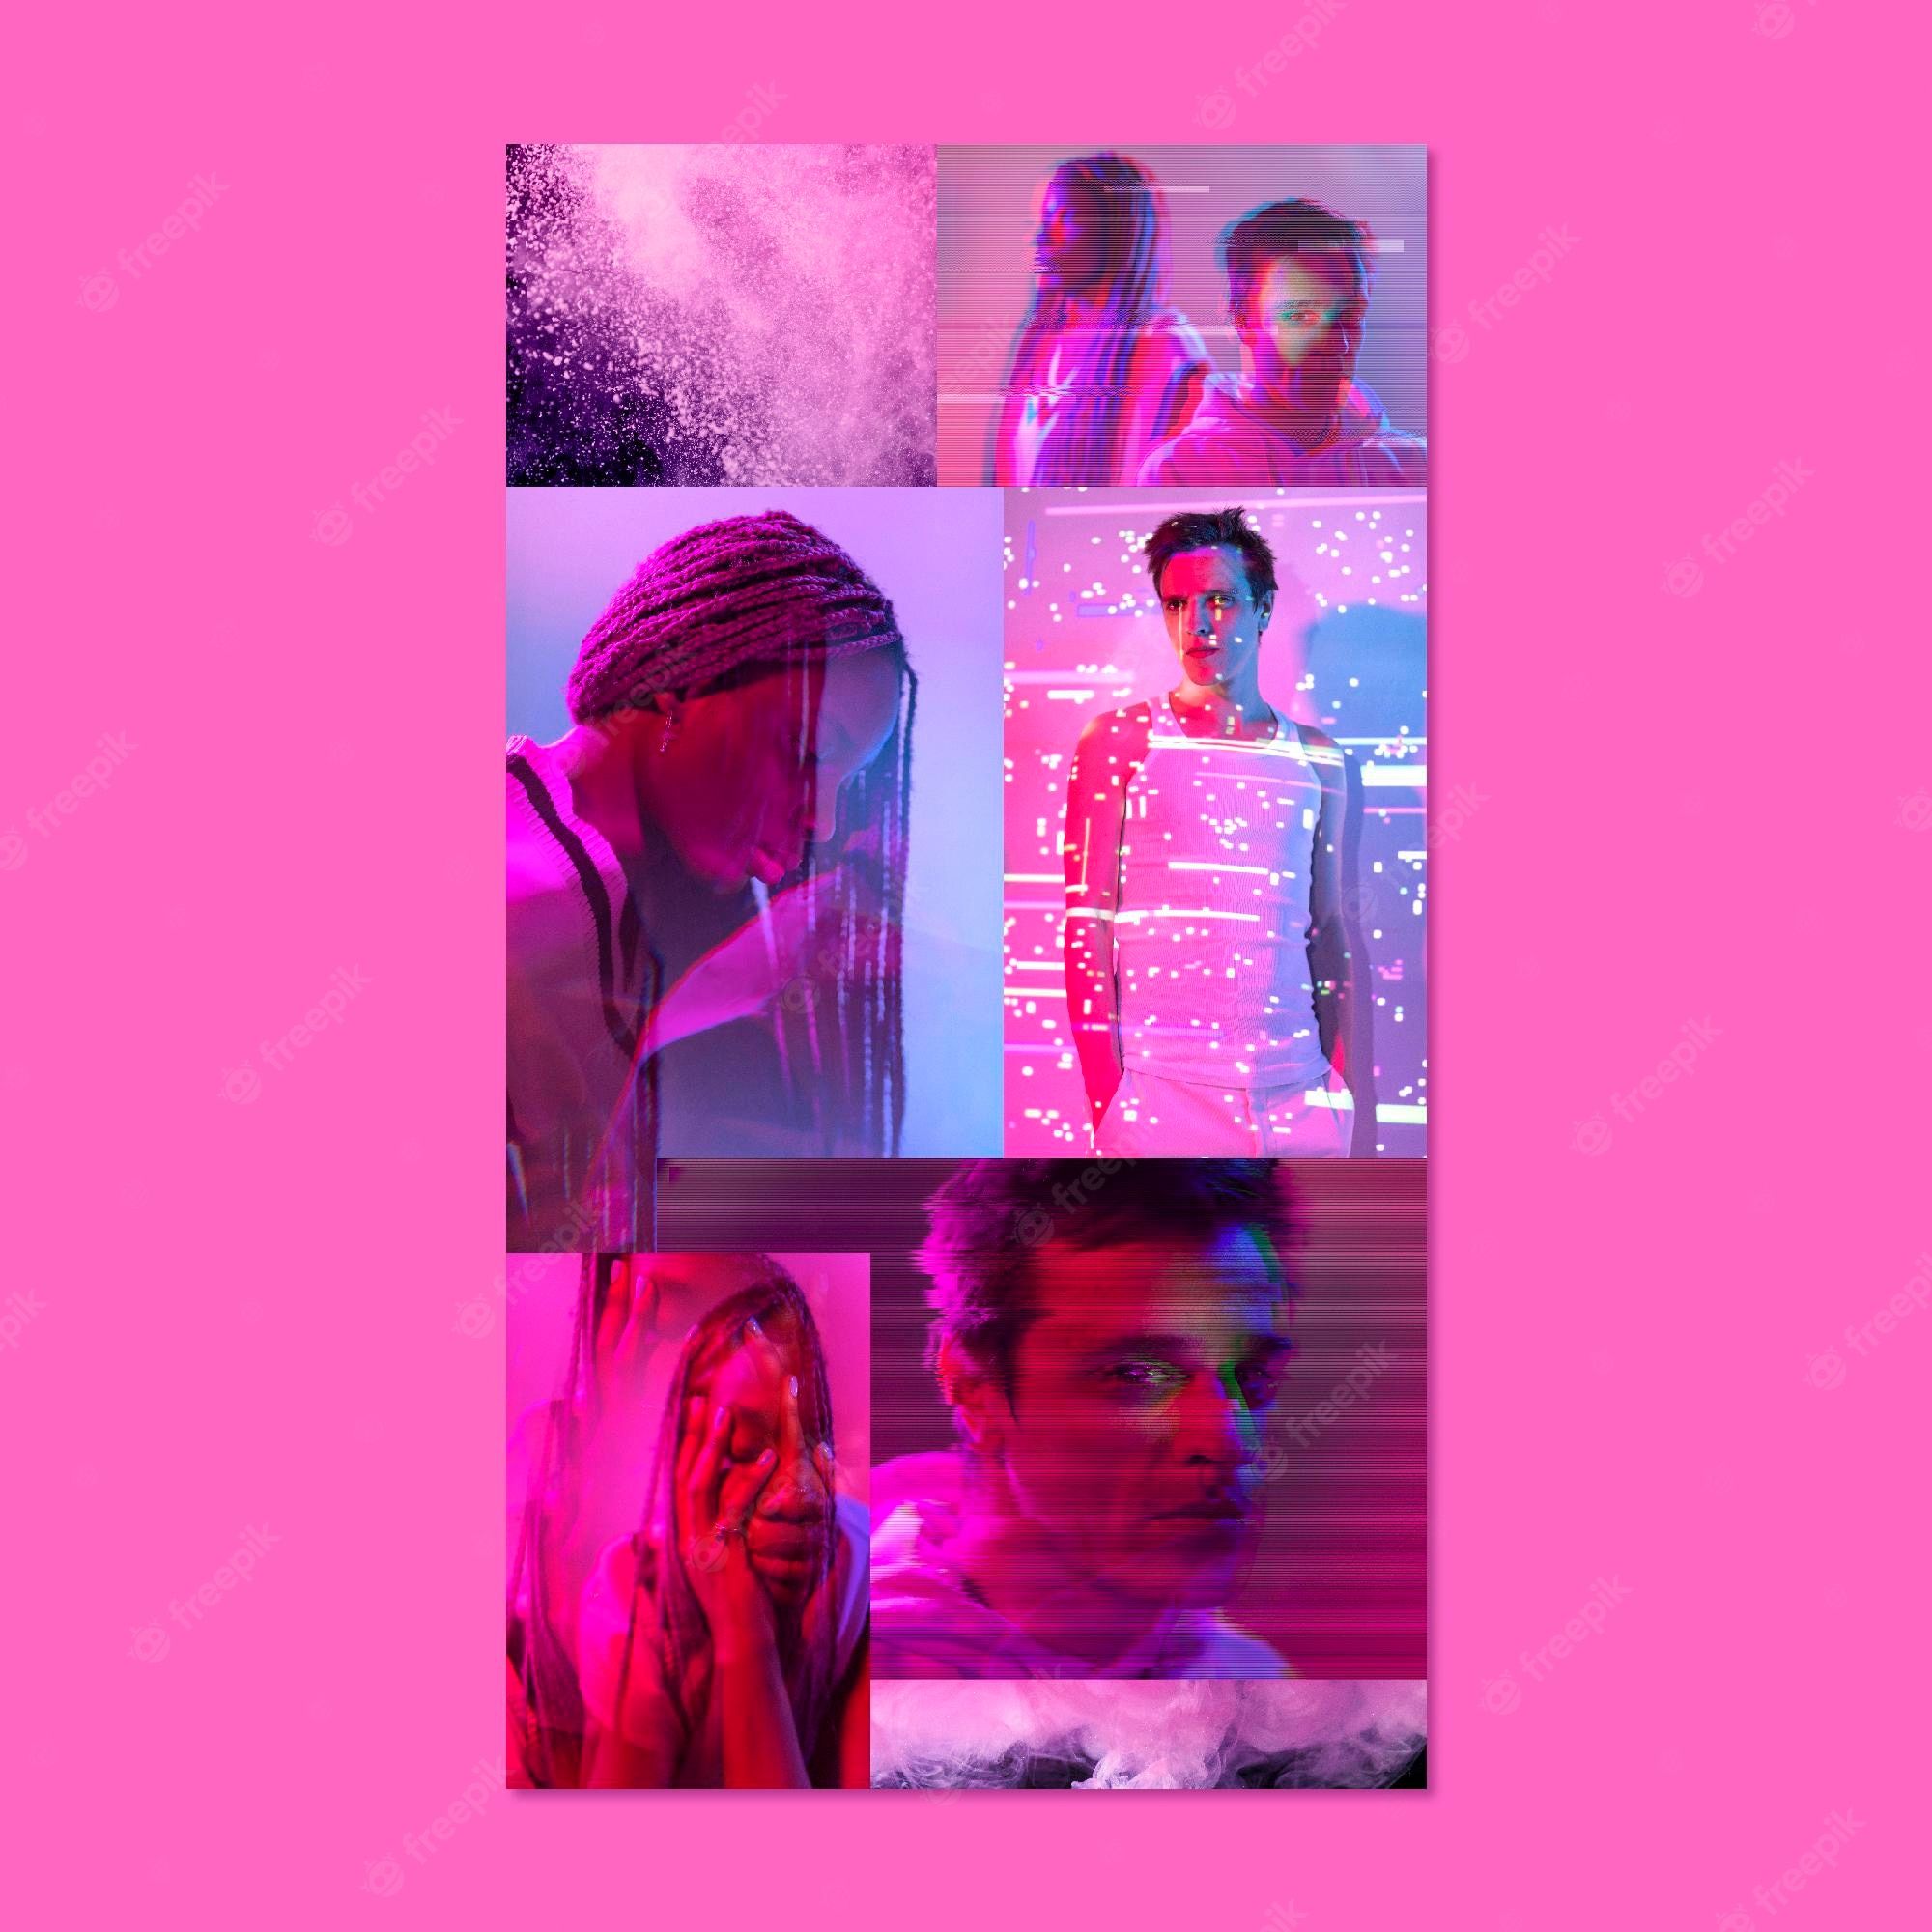 Aesthetic image with pink and purple colors, showing a man and woman in different poses and expressions. - Pink collage